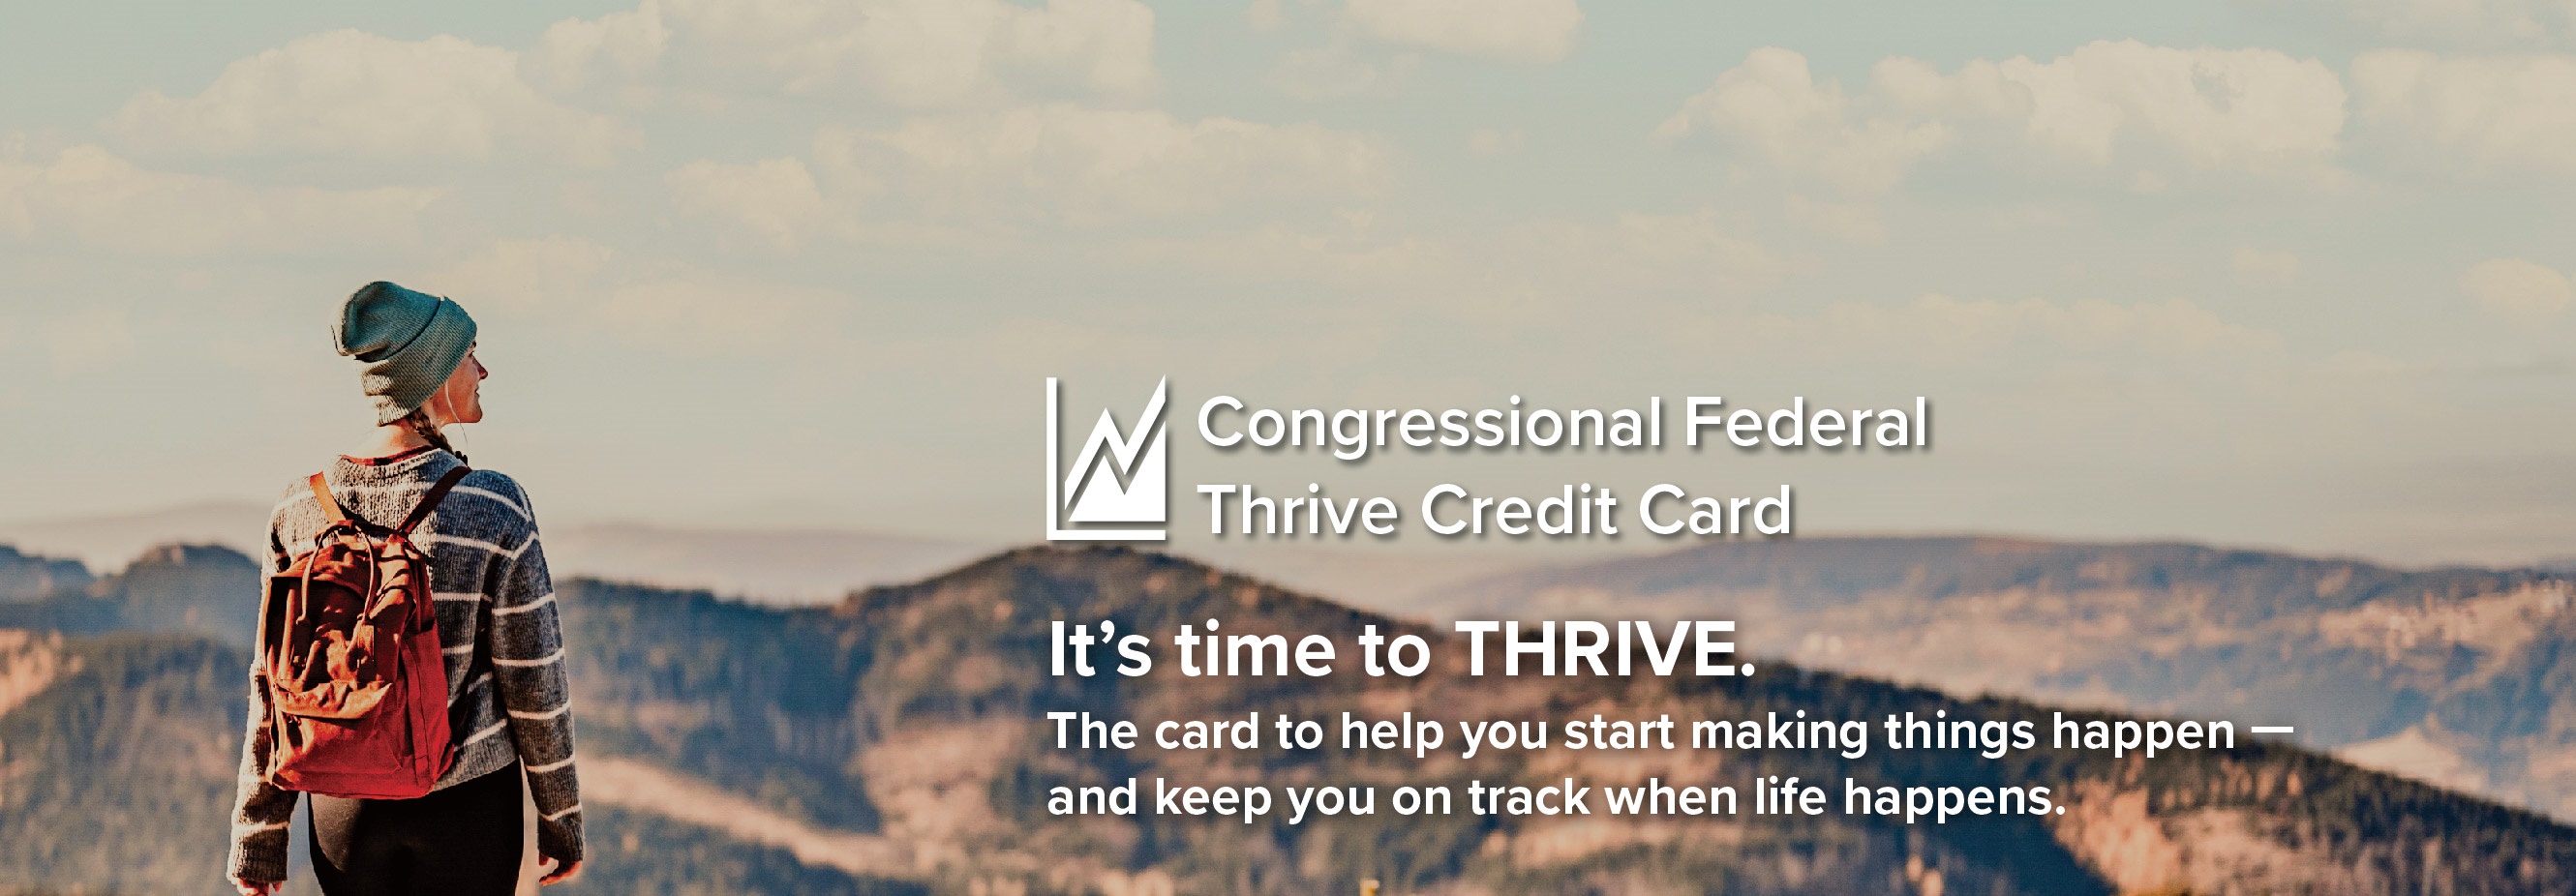 Congressional Federal Thrive Card: It's time to THRIVE. The card to help you when you start making things happen-and keep you on track when life happens.